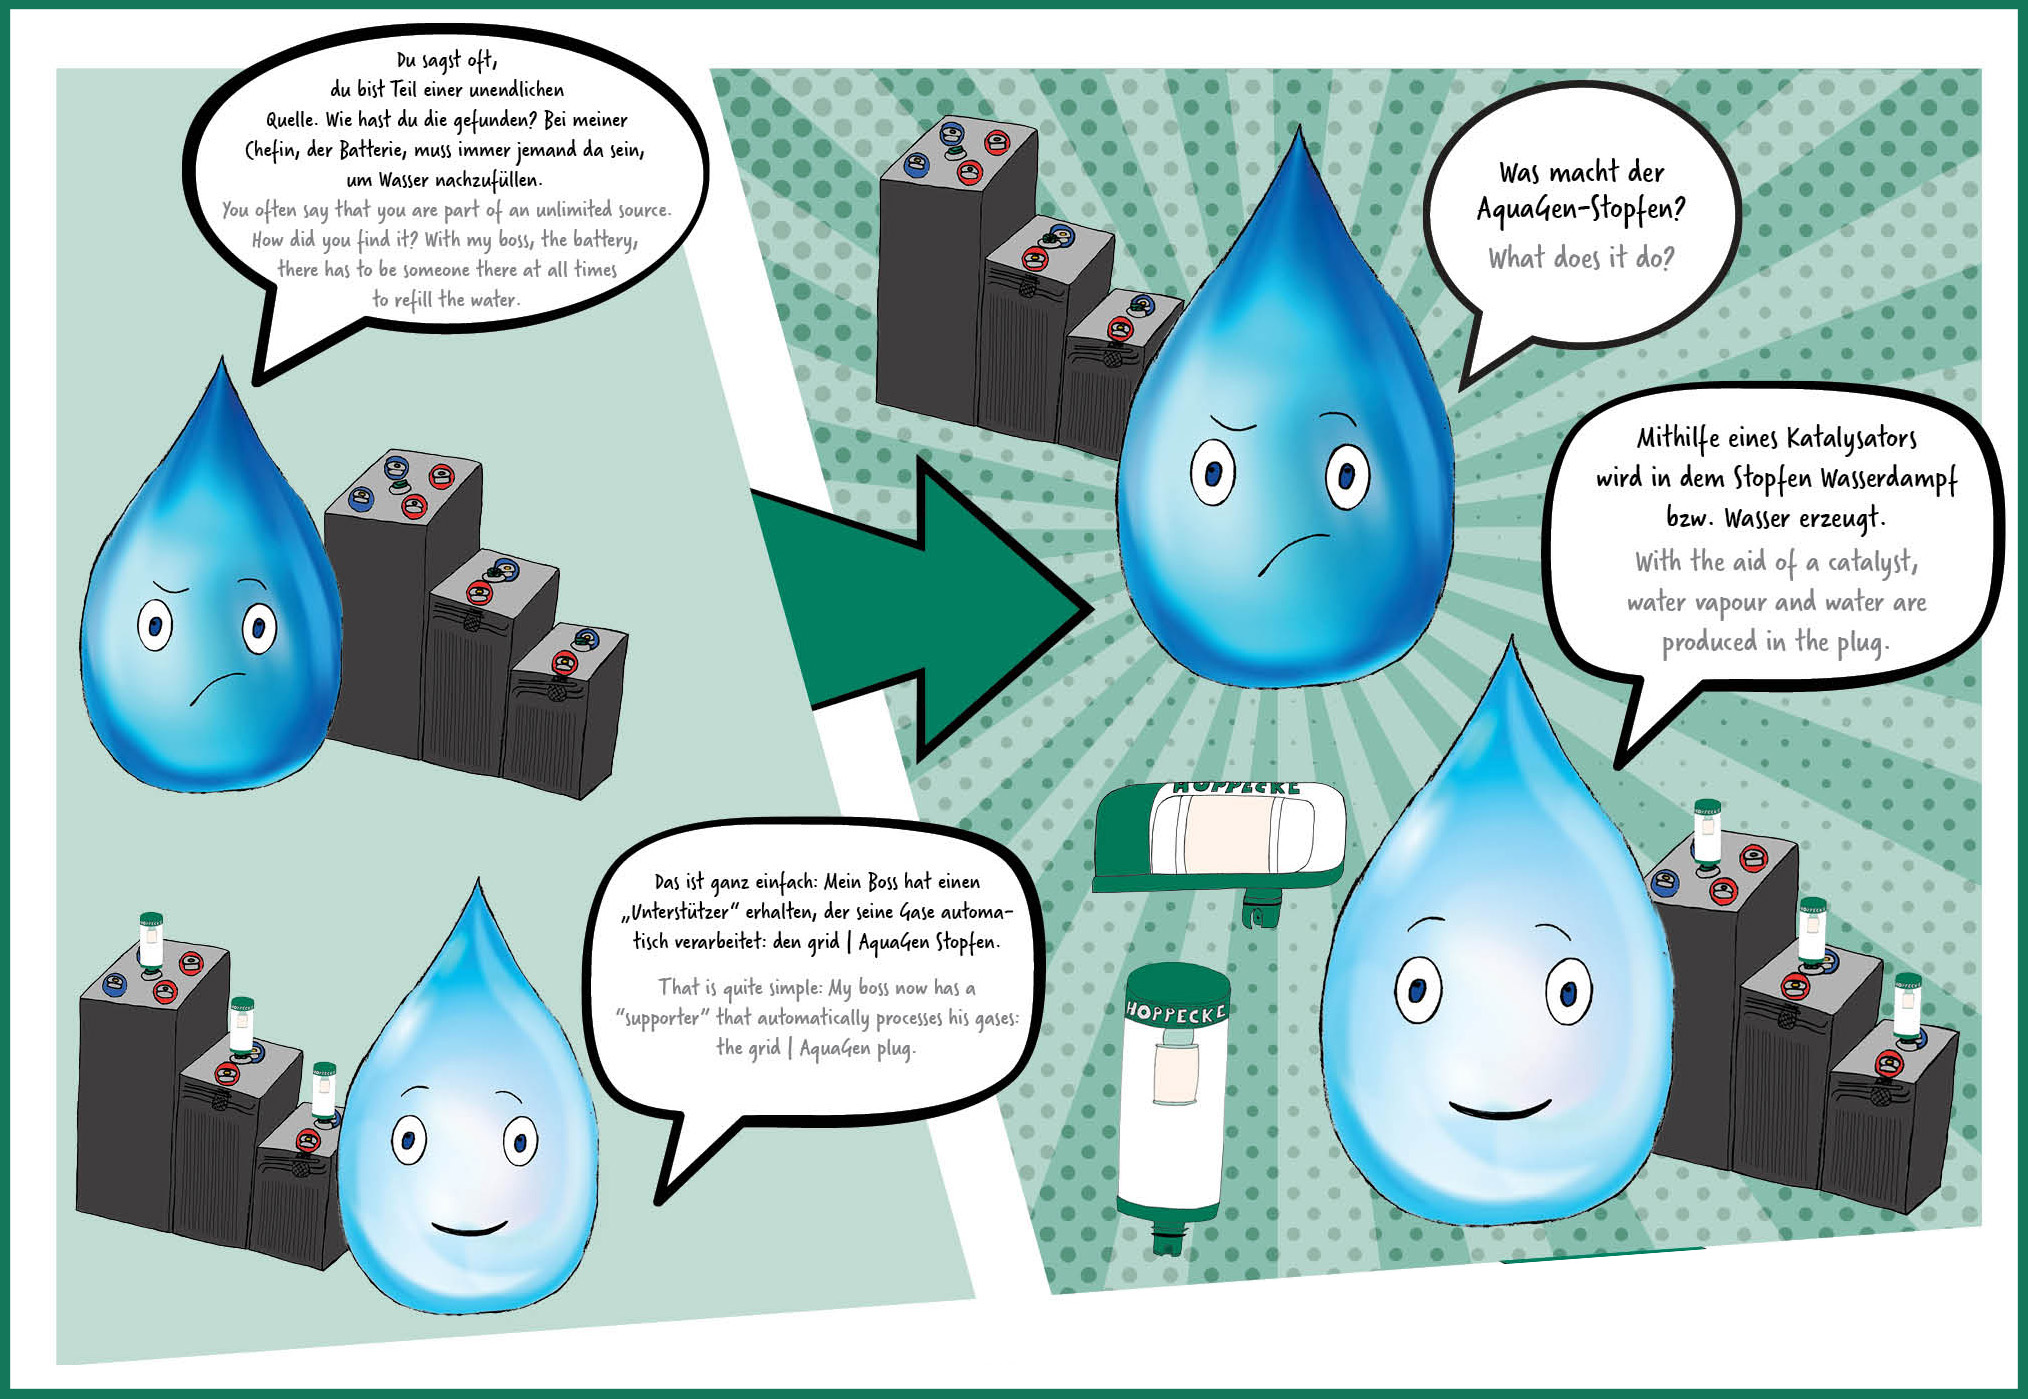 Comic about 2 water drops talking about the use of the Hoppecke Grid Aquagen stopper